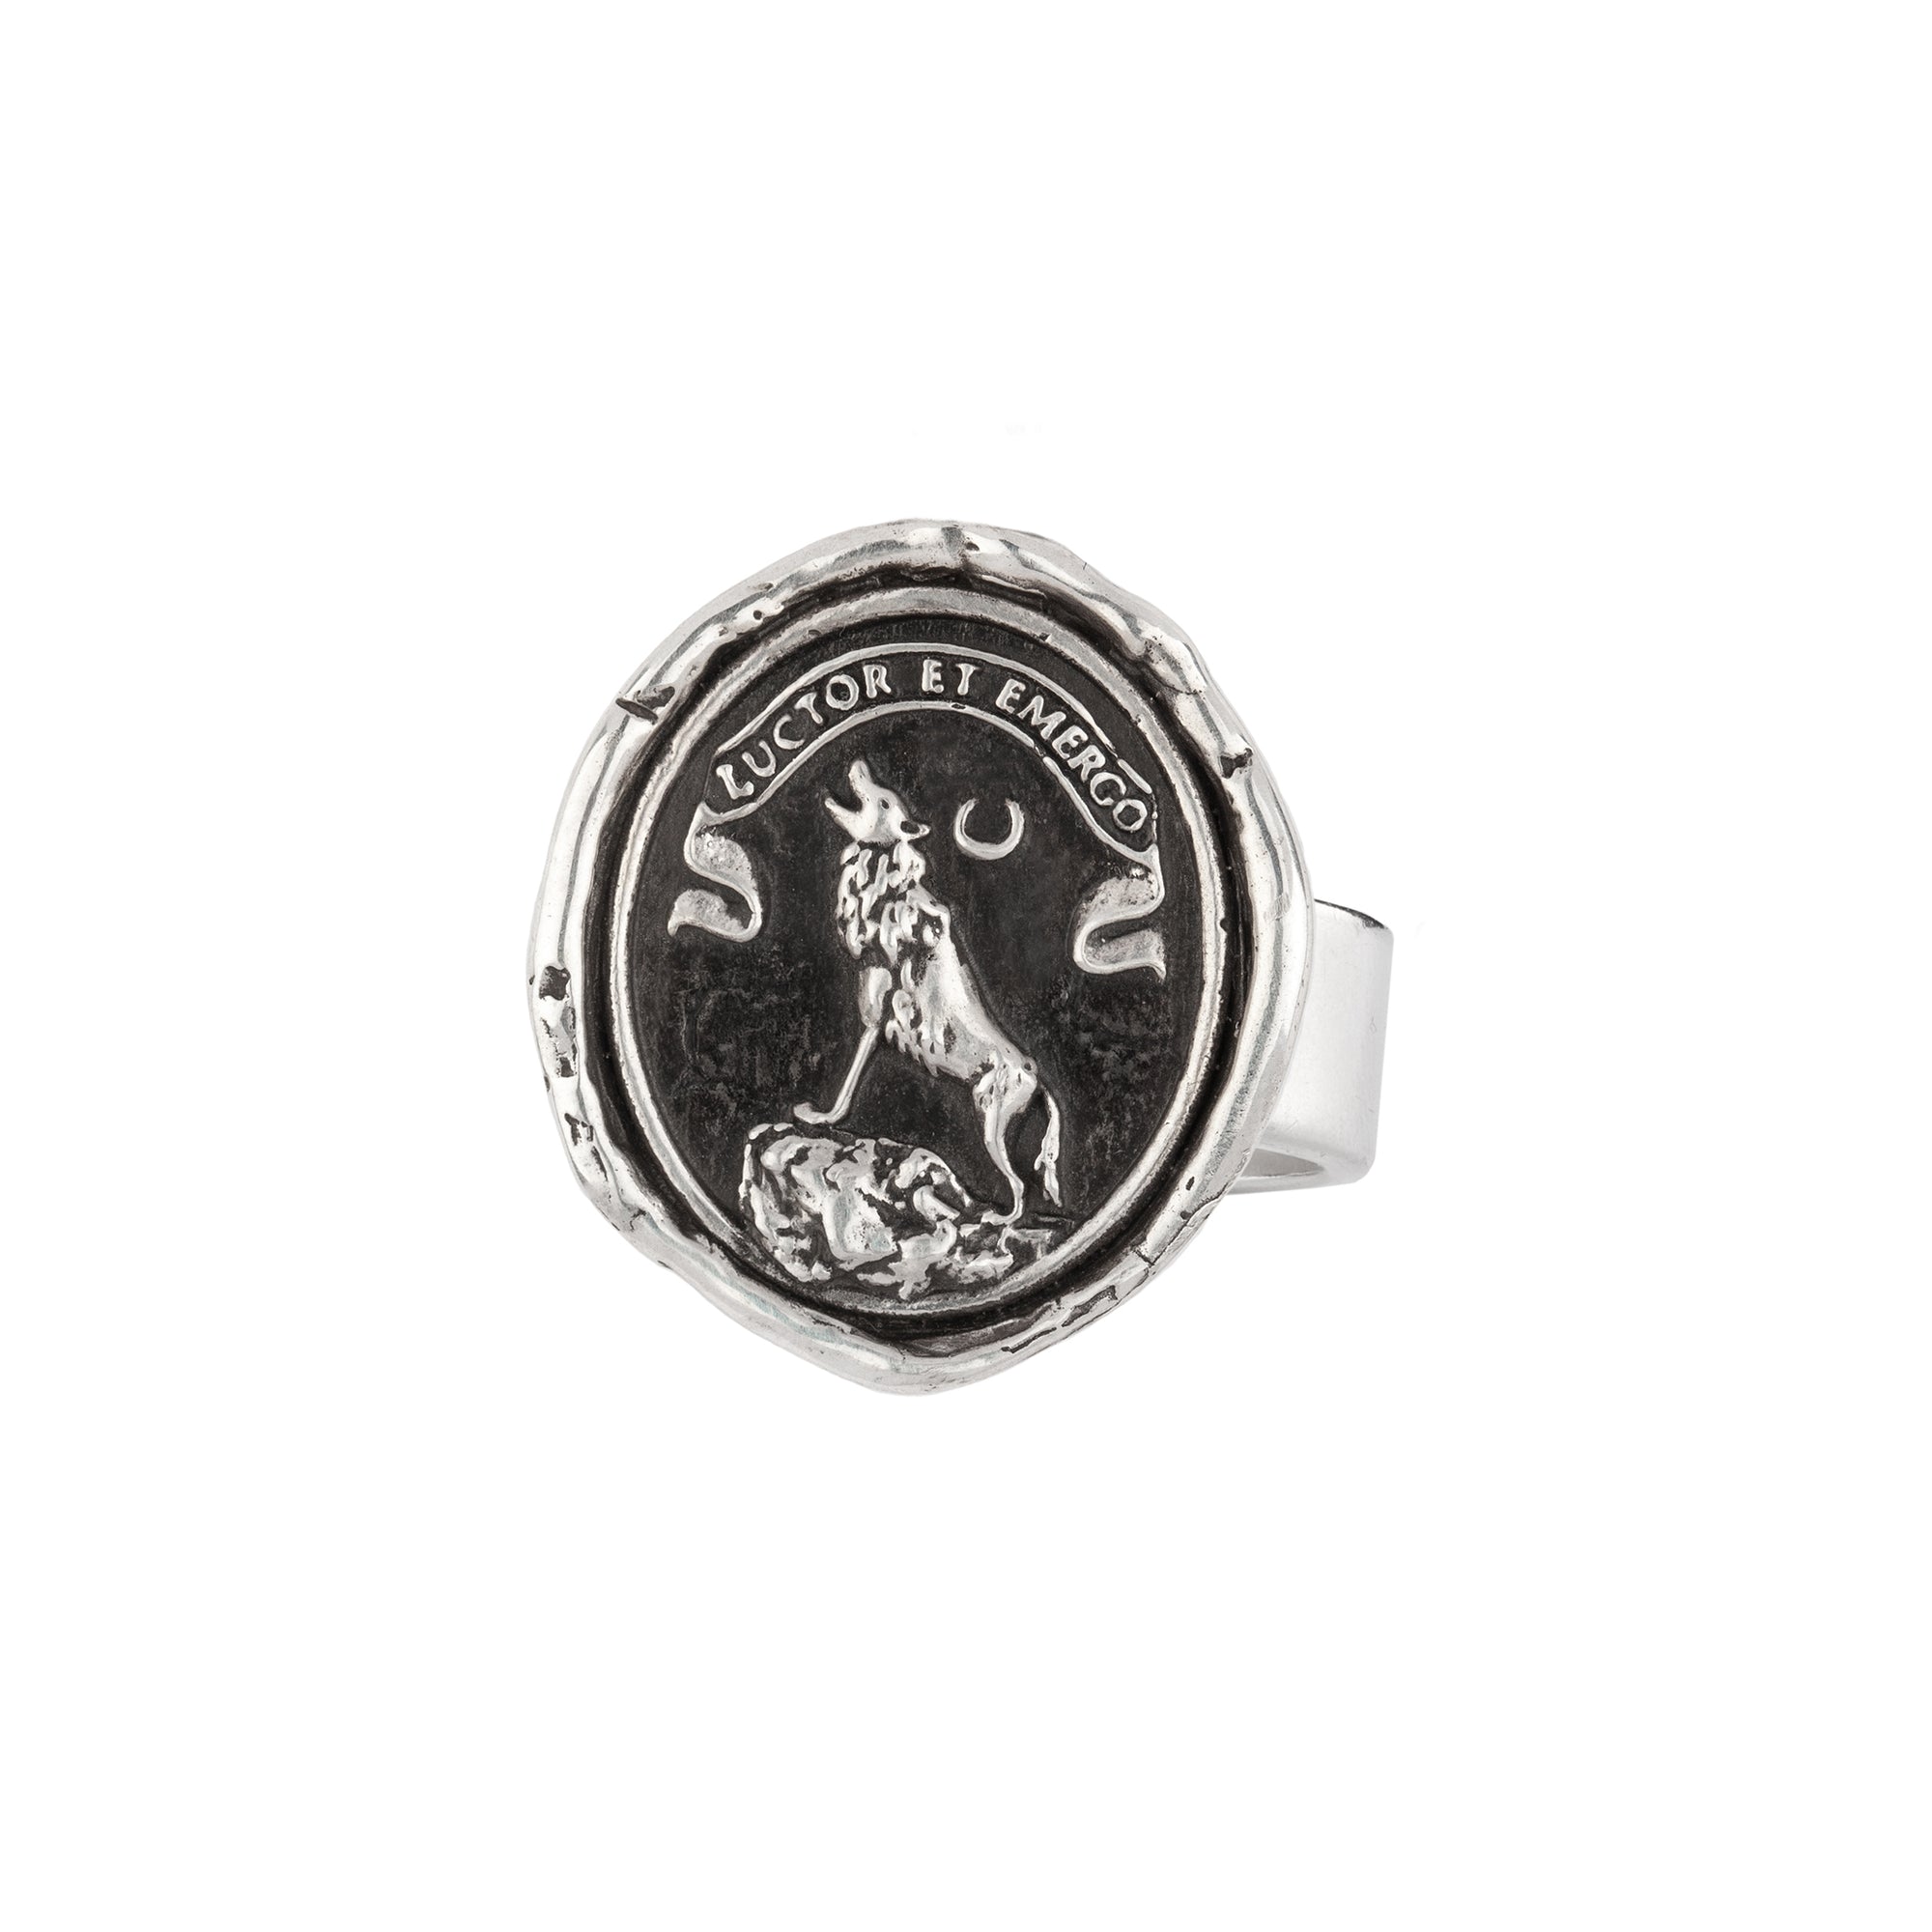 A sterling silver ring with our Struggle and Emerge talisman.